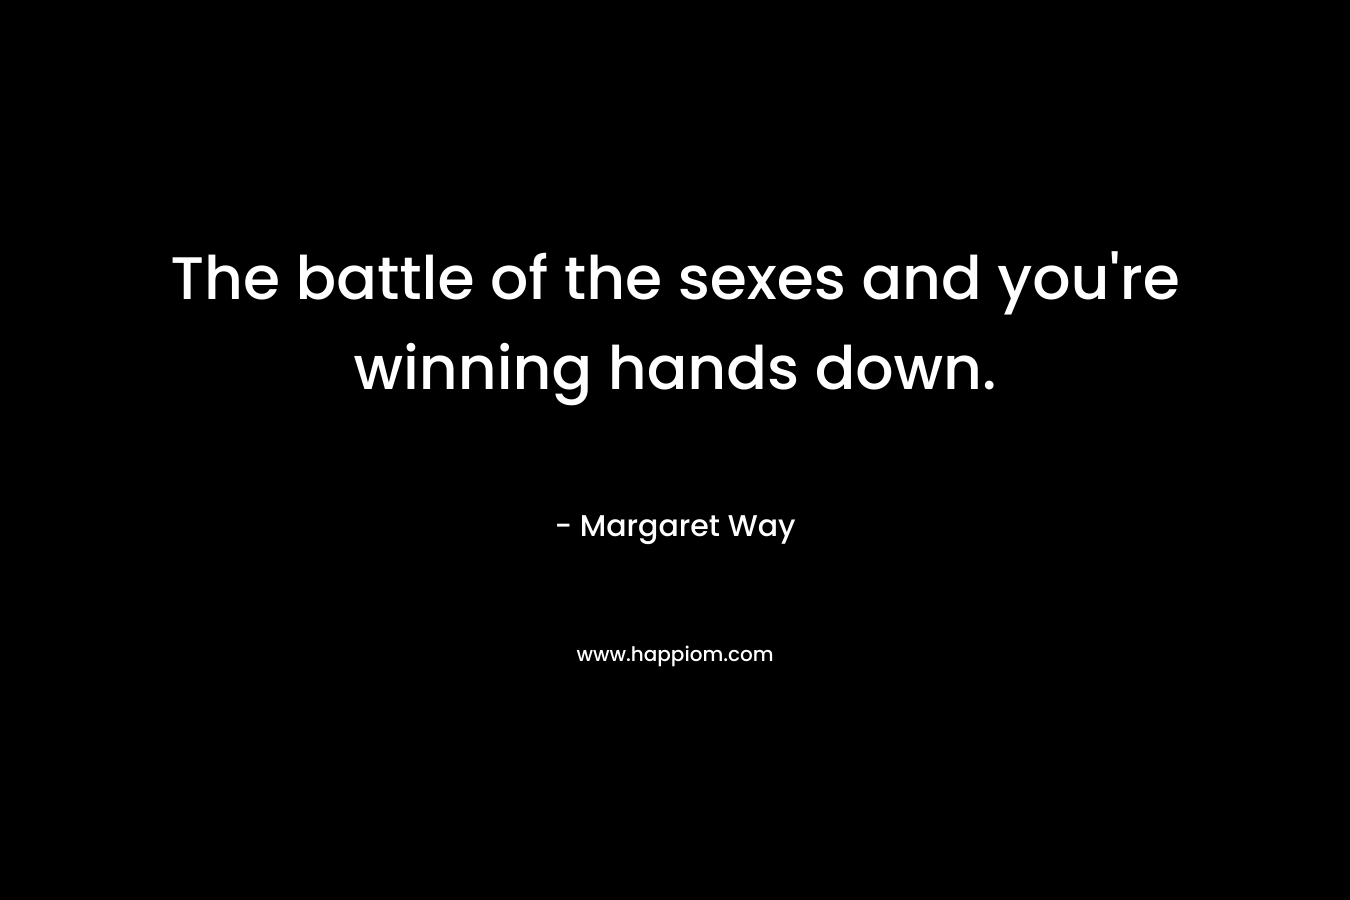 The battle of the sexes and you’re winning hands down. – Margaret Way